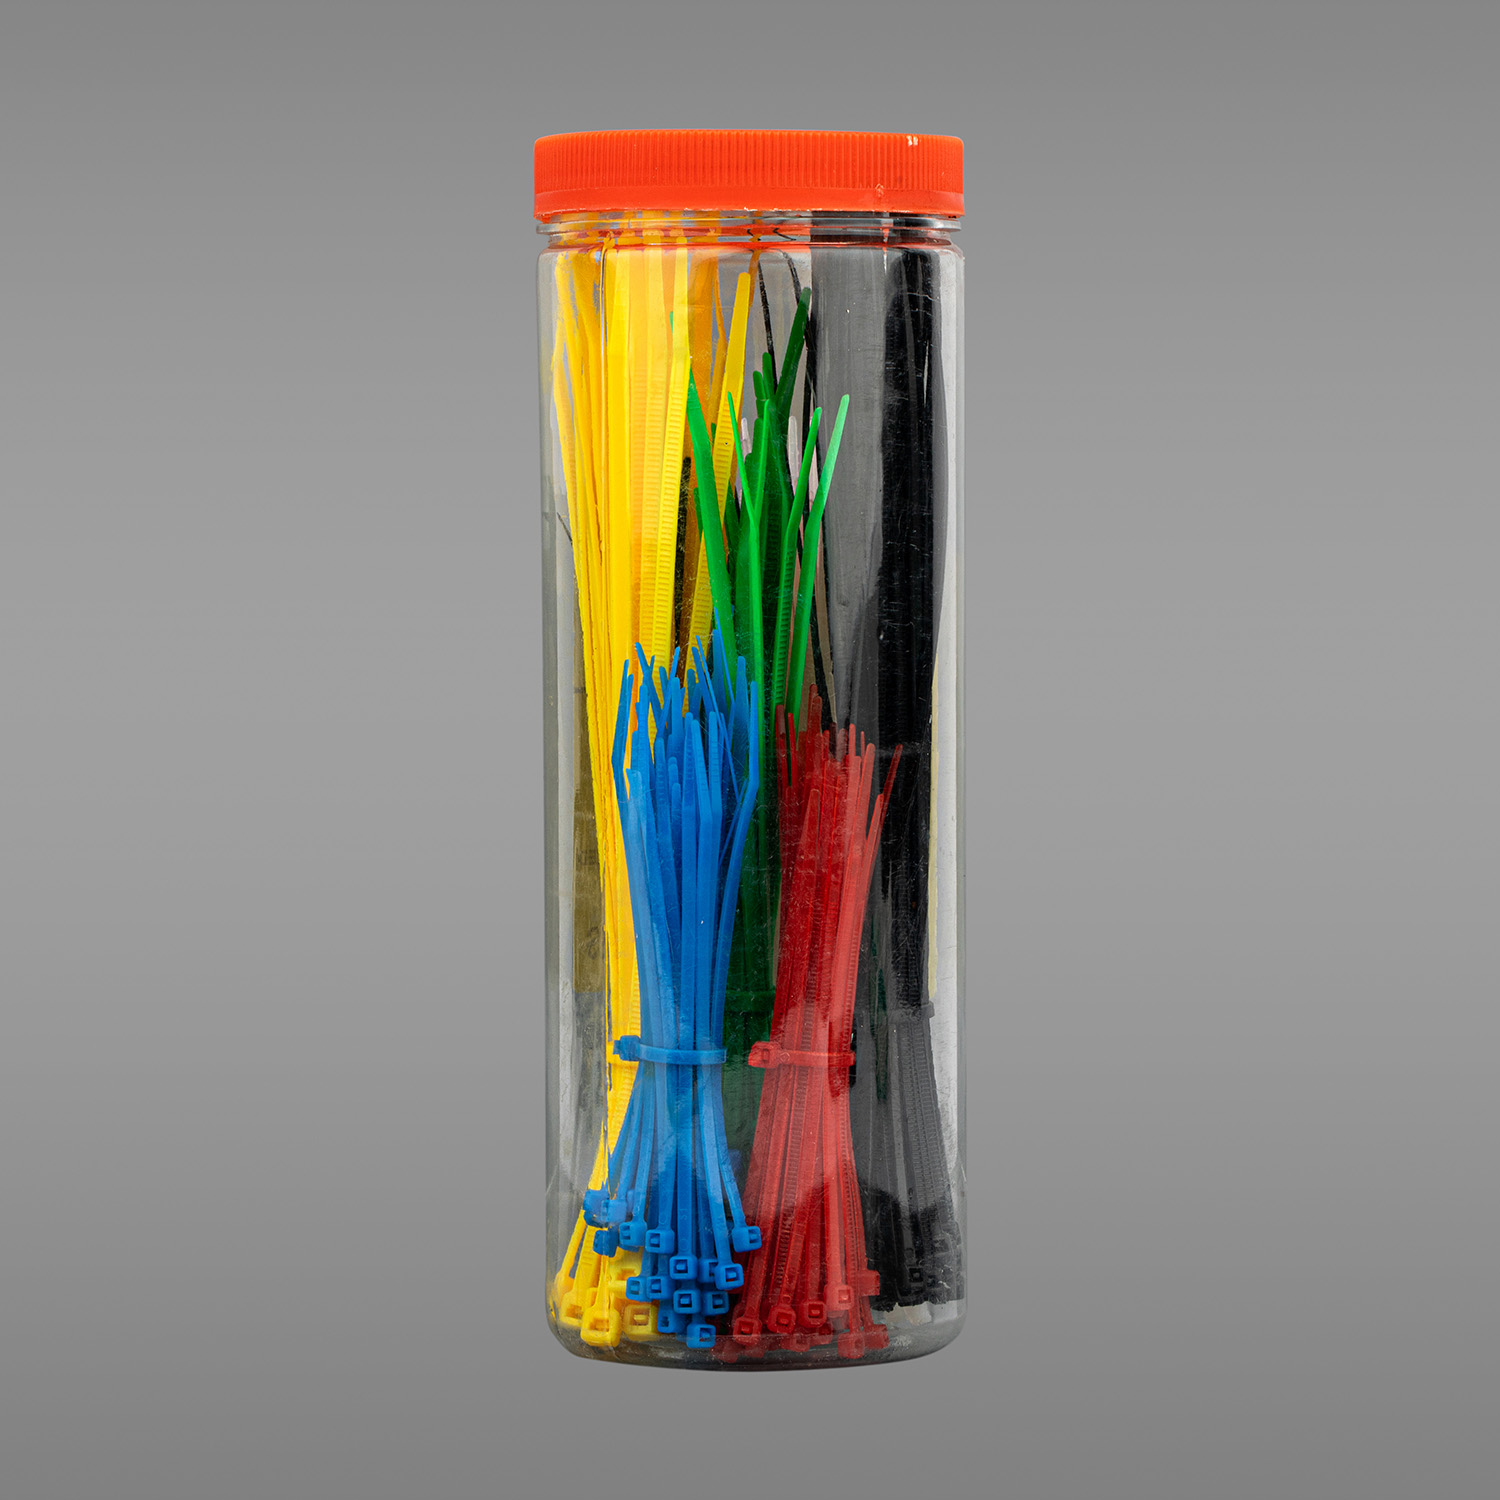 Self-Locking Plastic Nylon 66 Cable Tie with UL Certificate